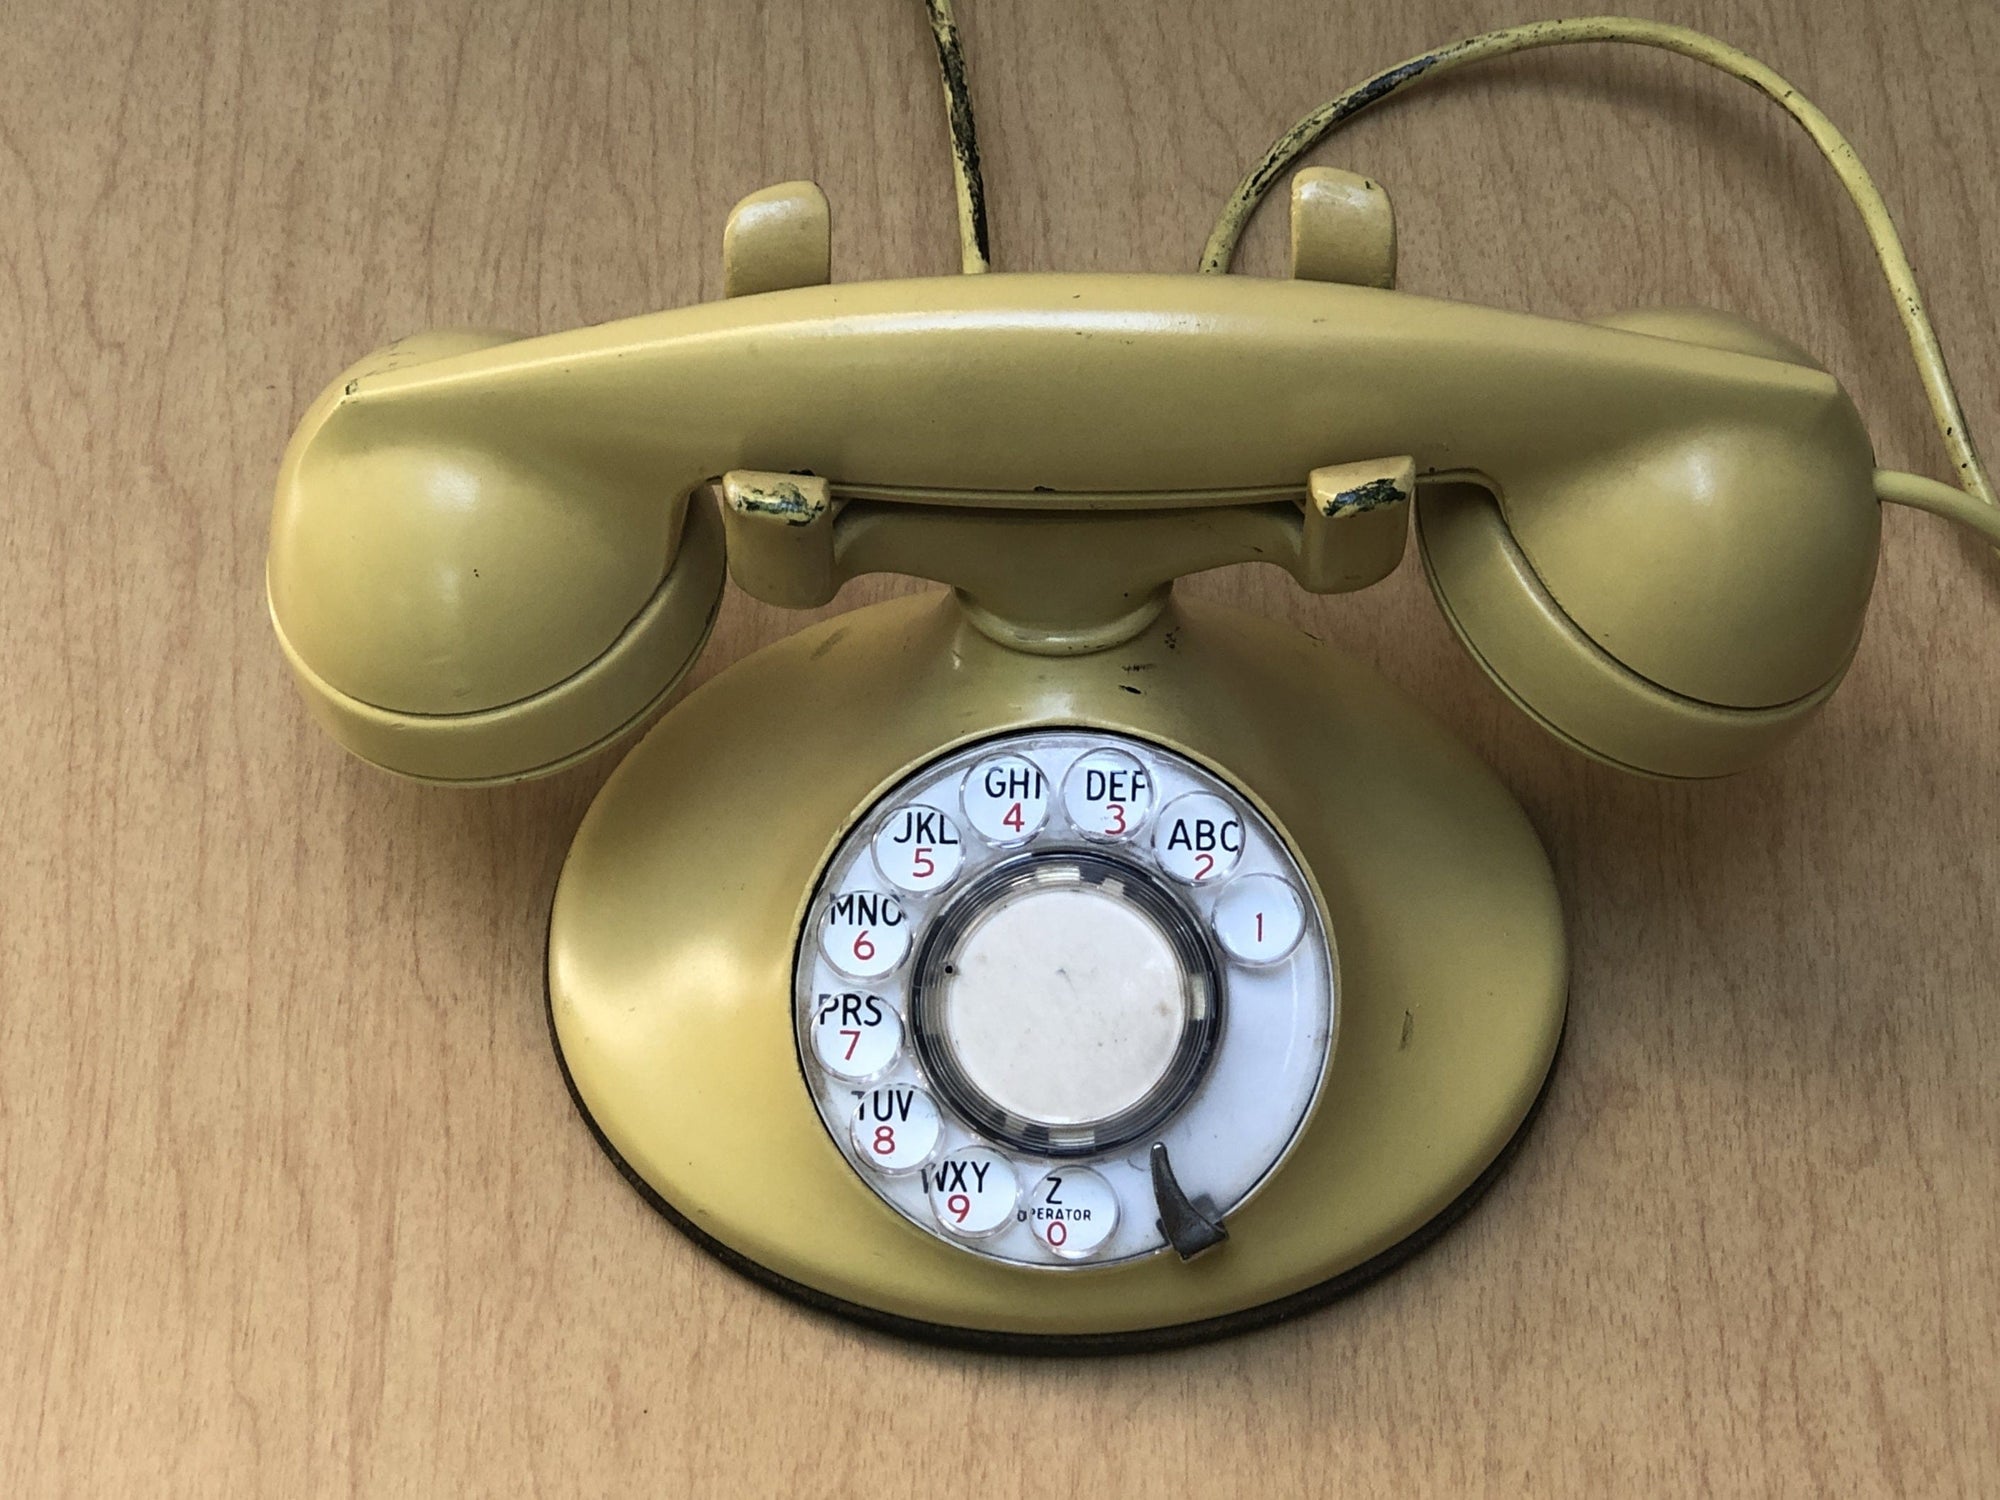 I Like Mike's Mid Century Modern Corded Phones Western Electric Antique Yellow Metal Telephone, Circa 1940s